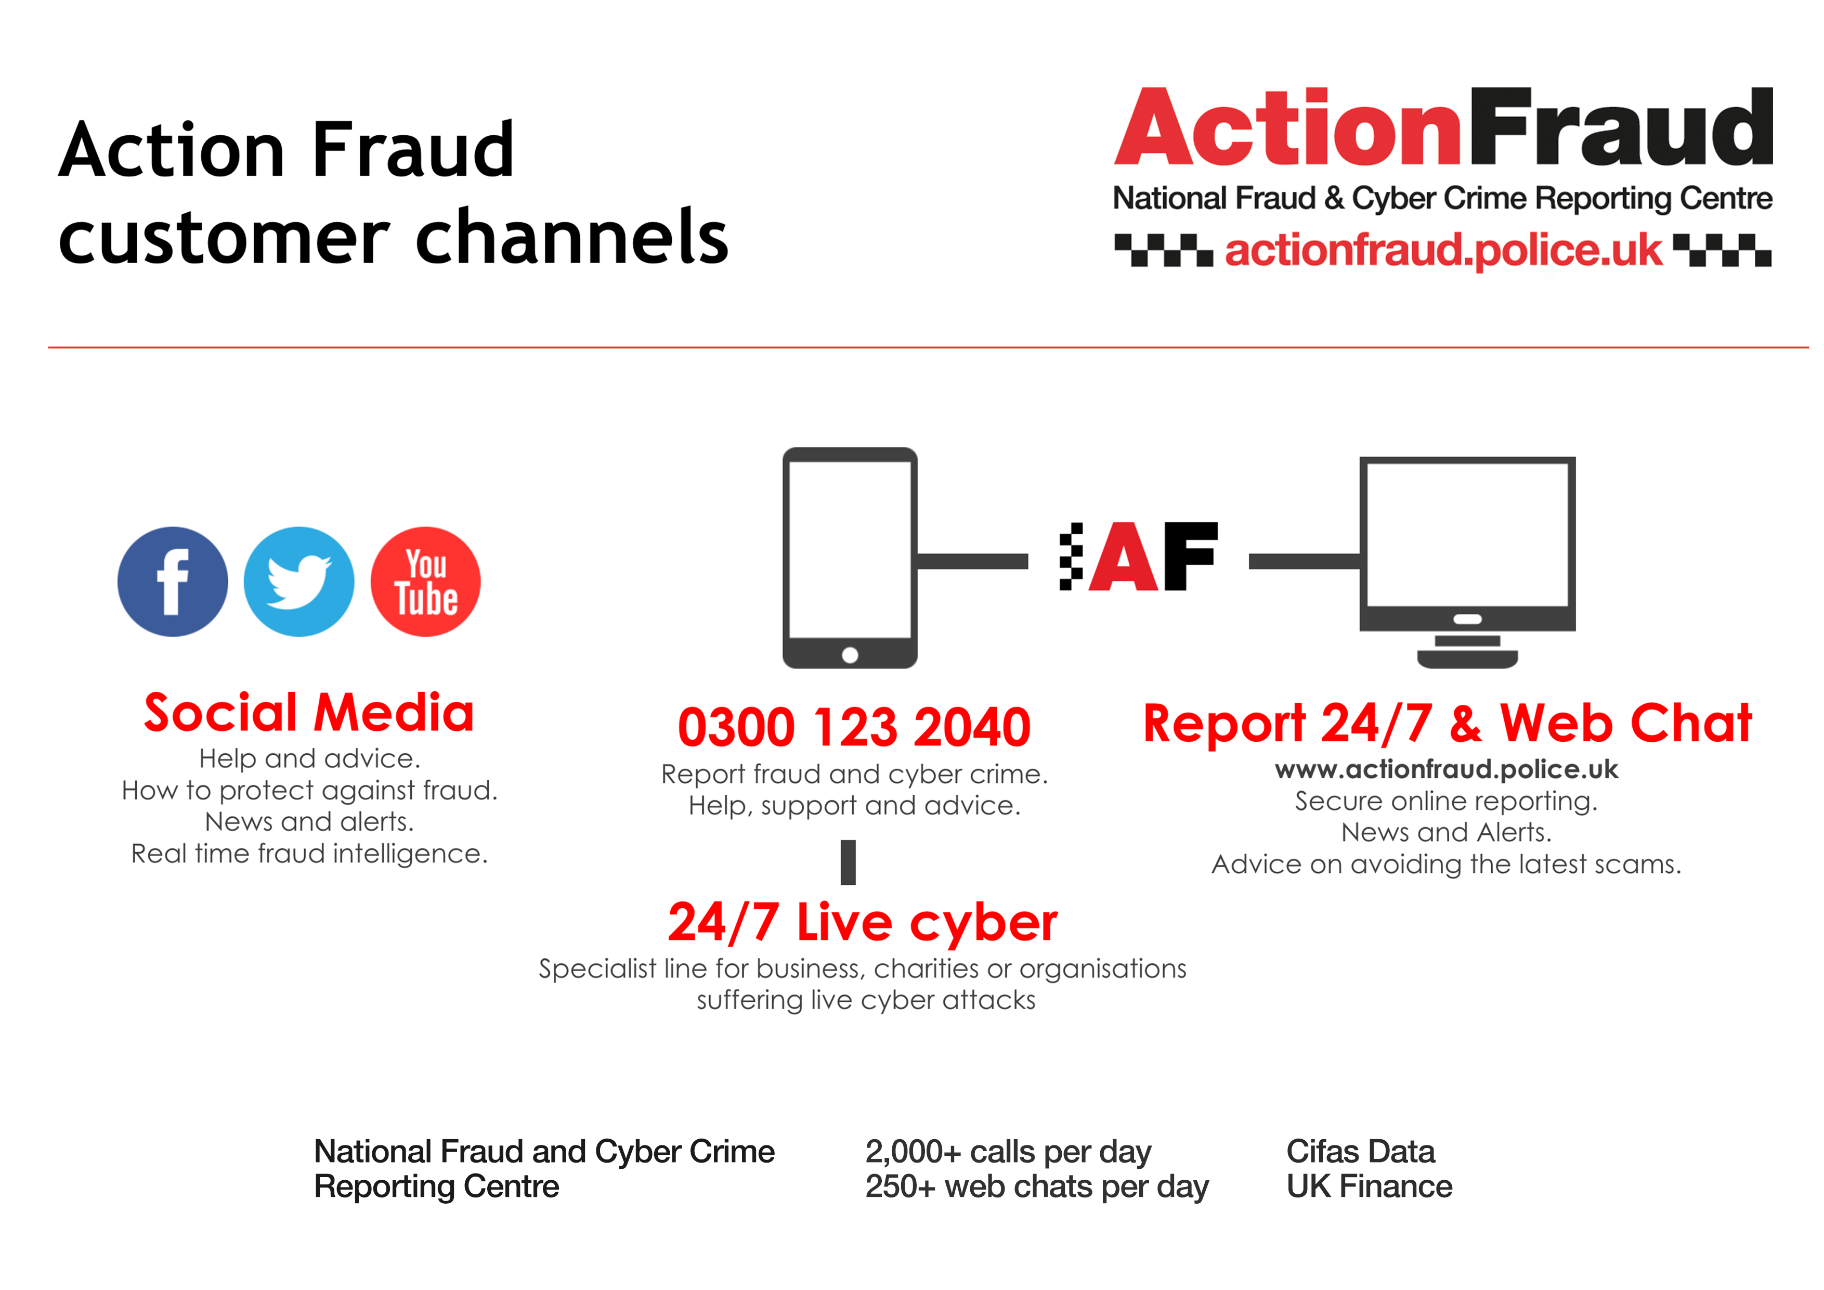 0300 123 2040 - Report fraud and cyber crime. Help, support and advice  Report 24/7 & Web Chat (www.actionfraud.police.uk)